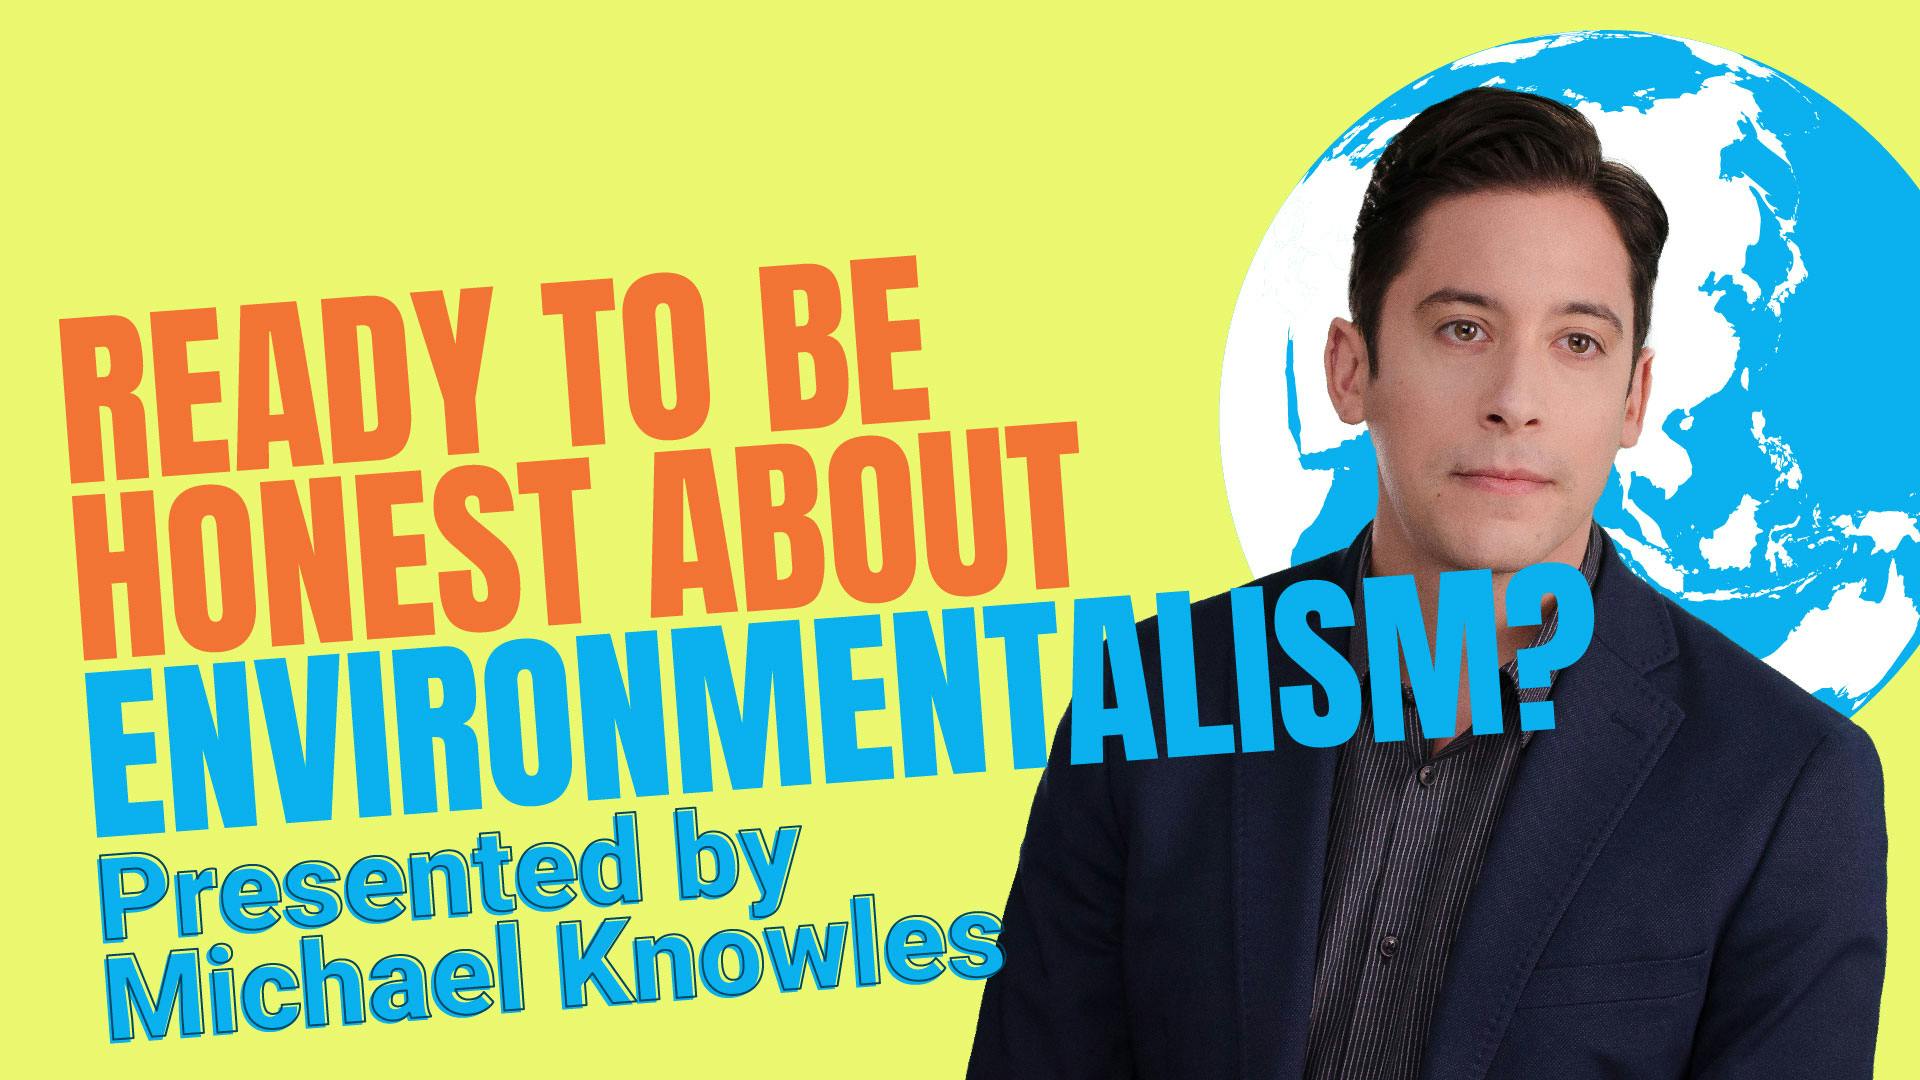 Ready to Be Honest about Environmentalism?